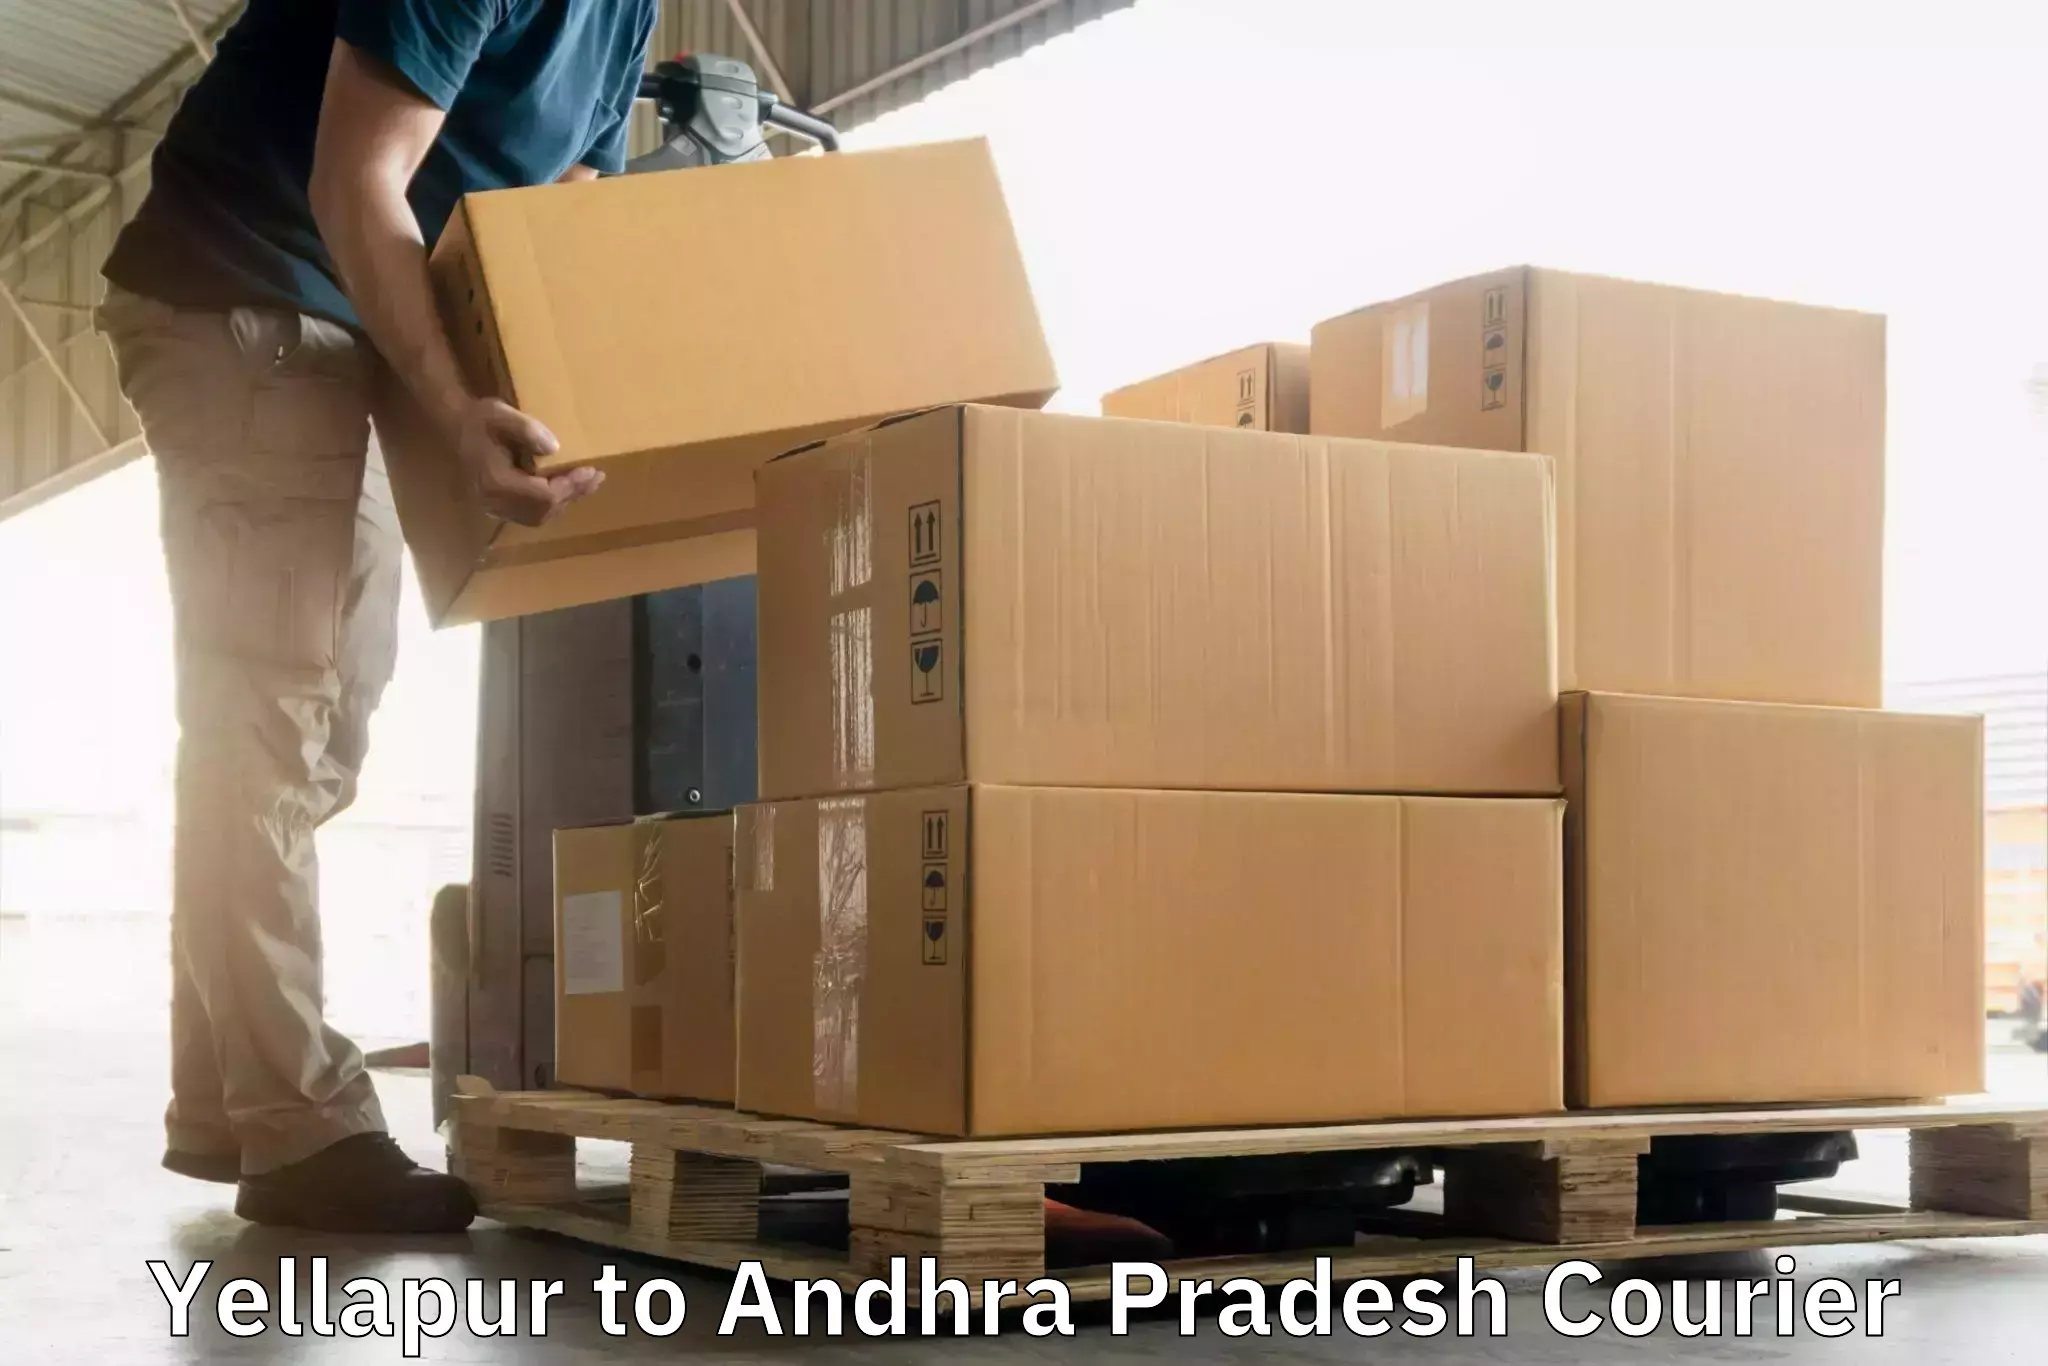 Next-generation courier services Yellapur to Adoni